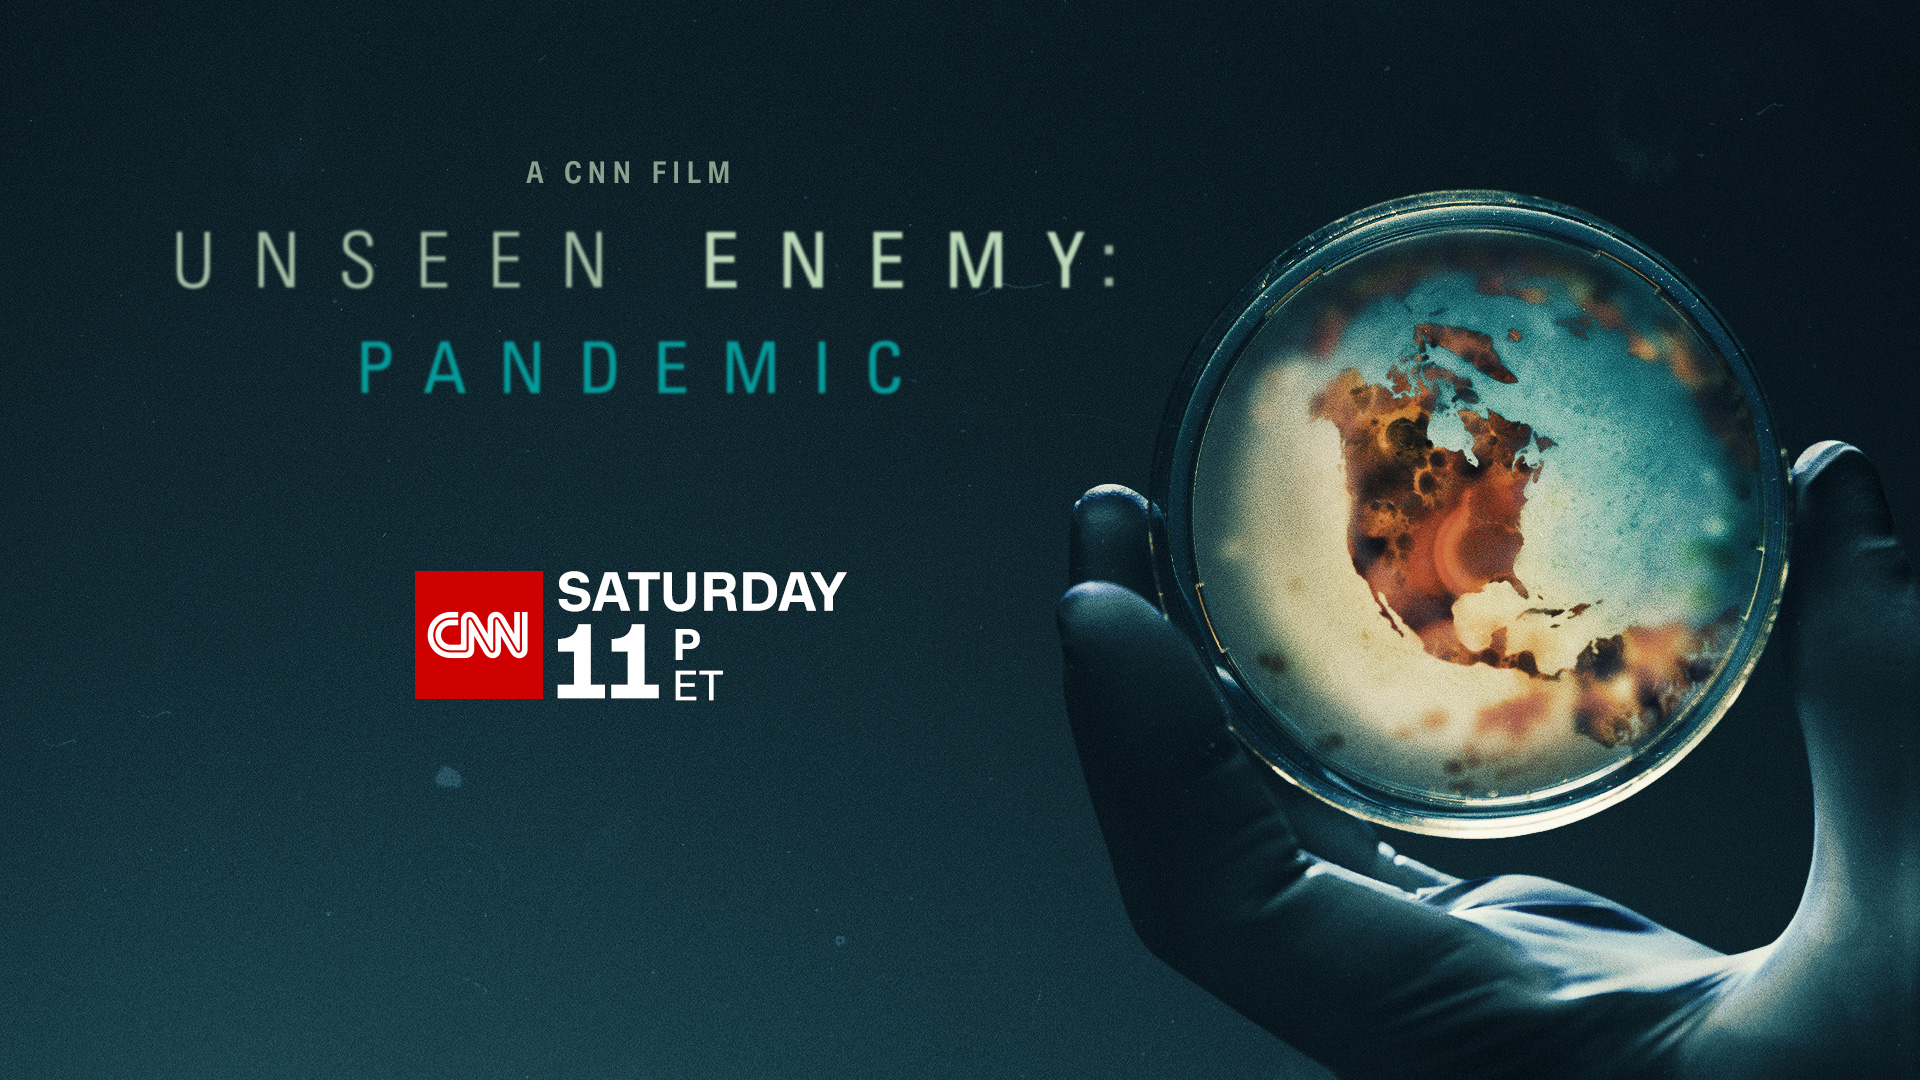 Cnn Films Airs Unseen Enemy Pandemic On Saturday March 14 At 11pm Eastern